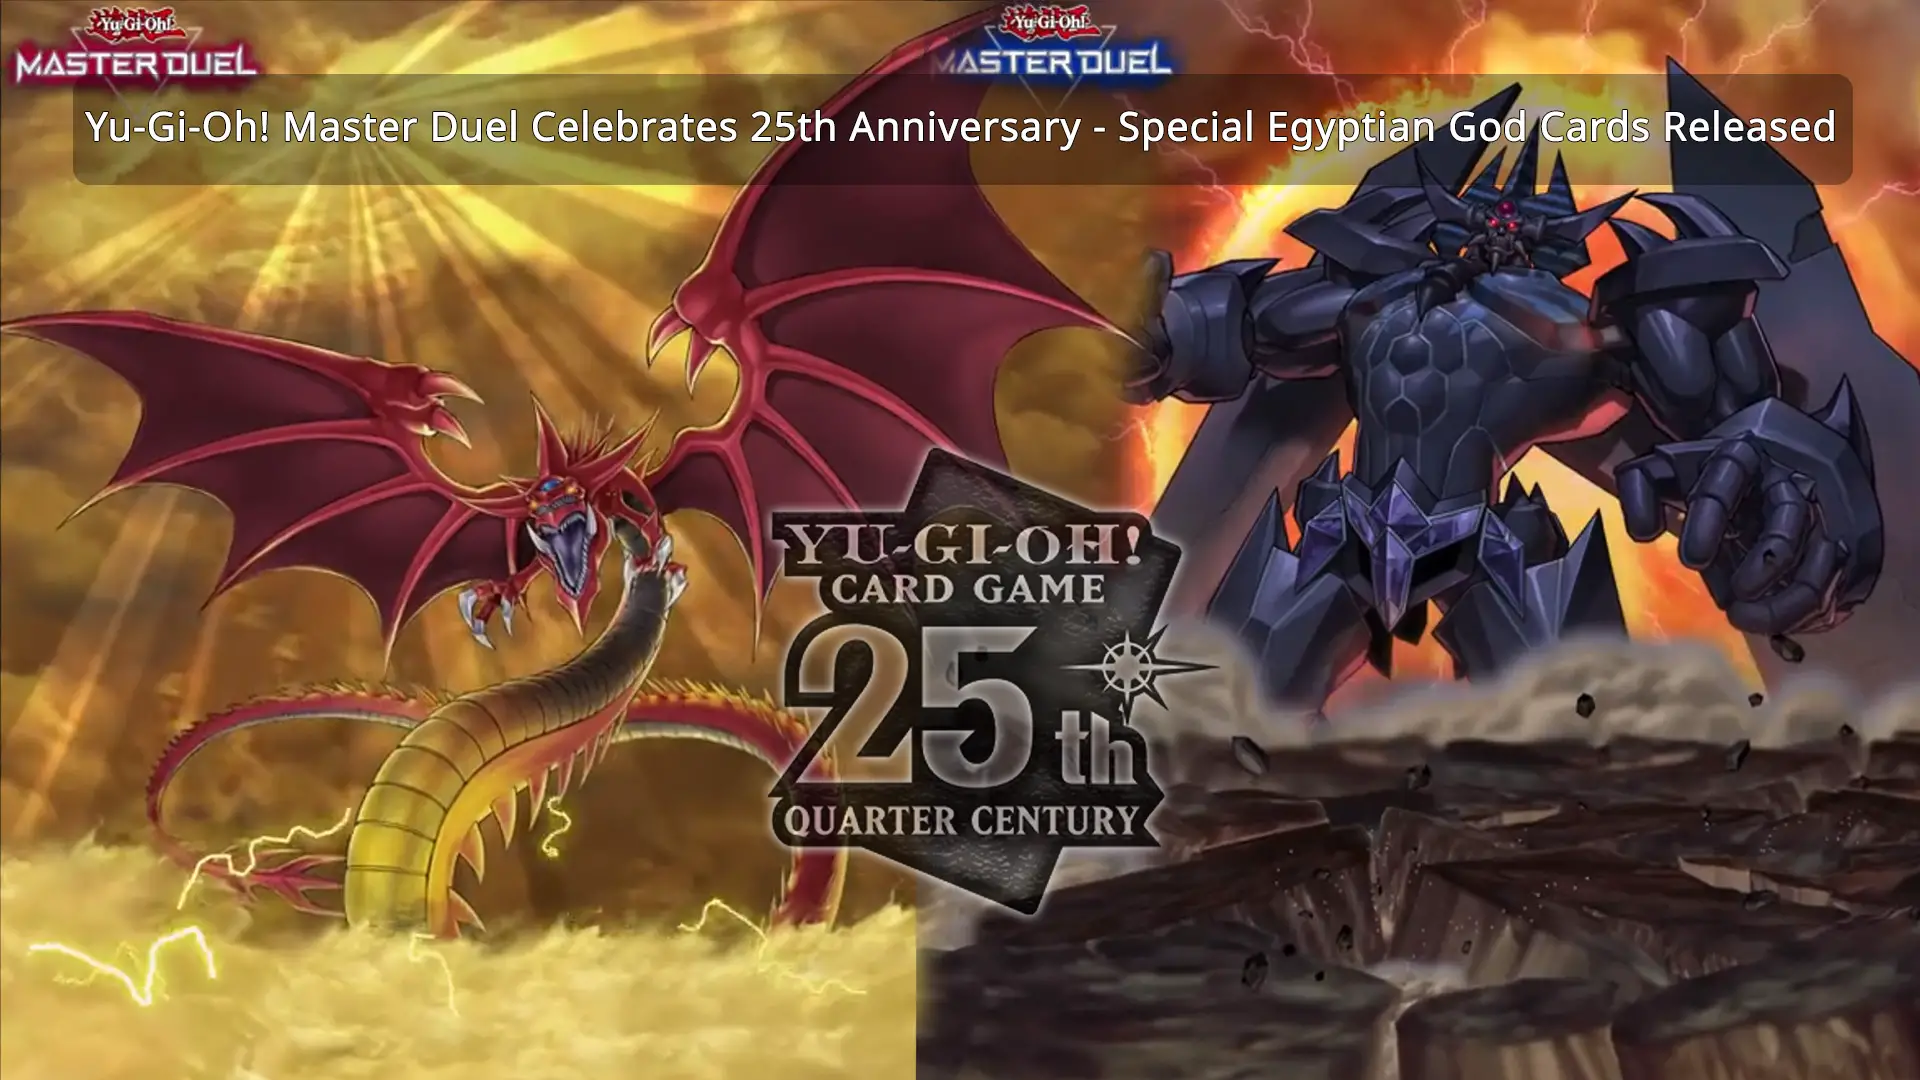 CELEBRATE 25 YEARS OF THE YU-GI-OH! CARD GAME IN YU-GI-OH! MASTER DUEL WITH  SPECIAL REWARDS, ITEMS, AND MORE